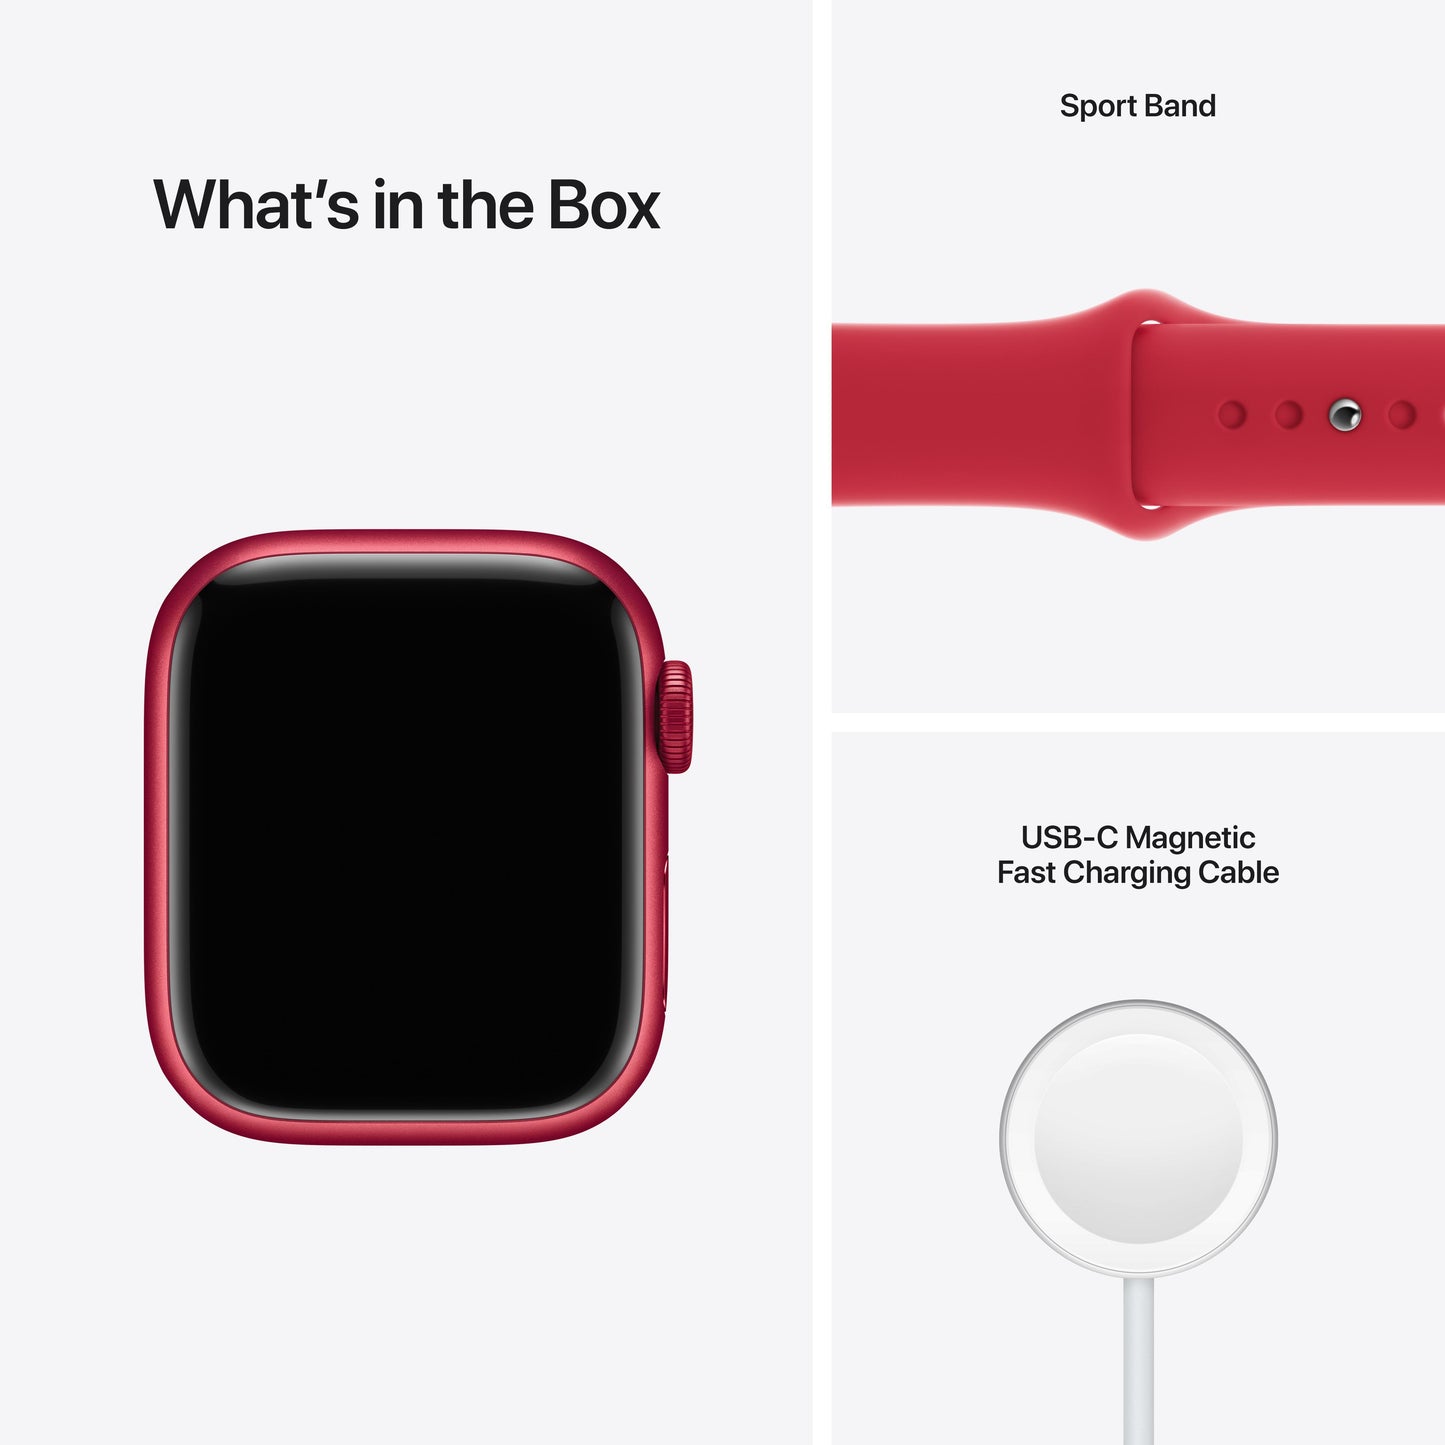 Apple Watch Series 7 GPS, 41mm (PRODUCT)RED Aluminium Case with (PRODUCT)RED Sport Band - Regular